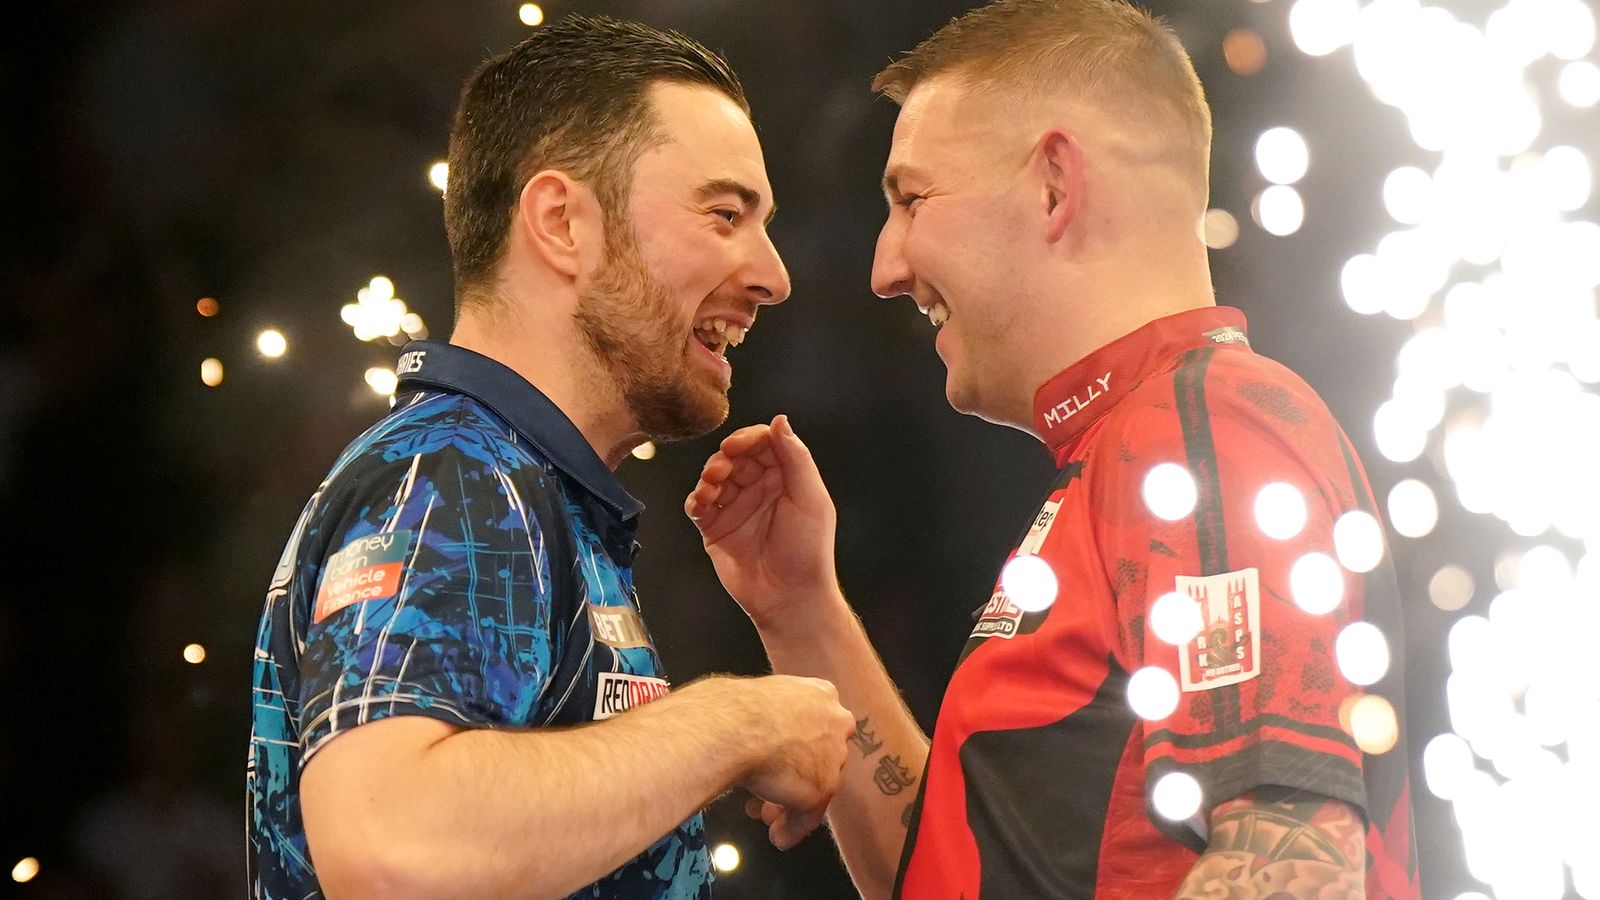 Premier League Darts: Luke Humphries is best player in the world by a million miles, says Nathan Aspinall | Darts News